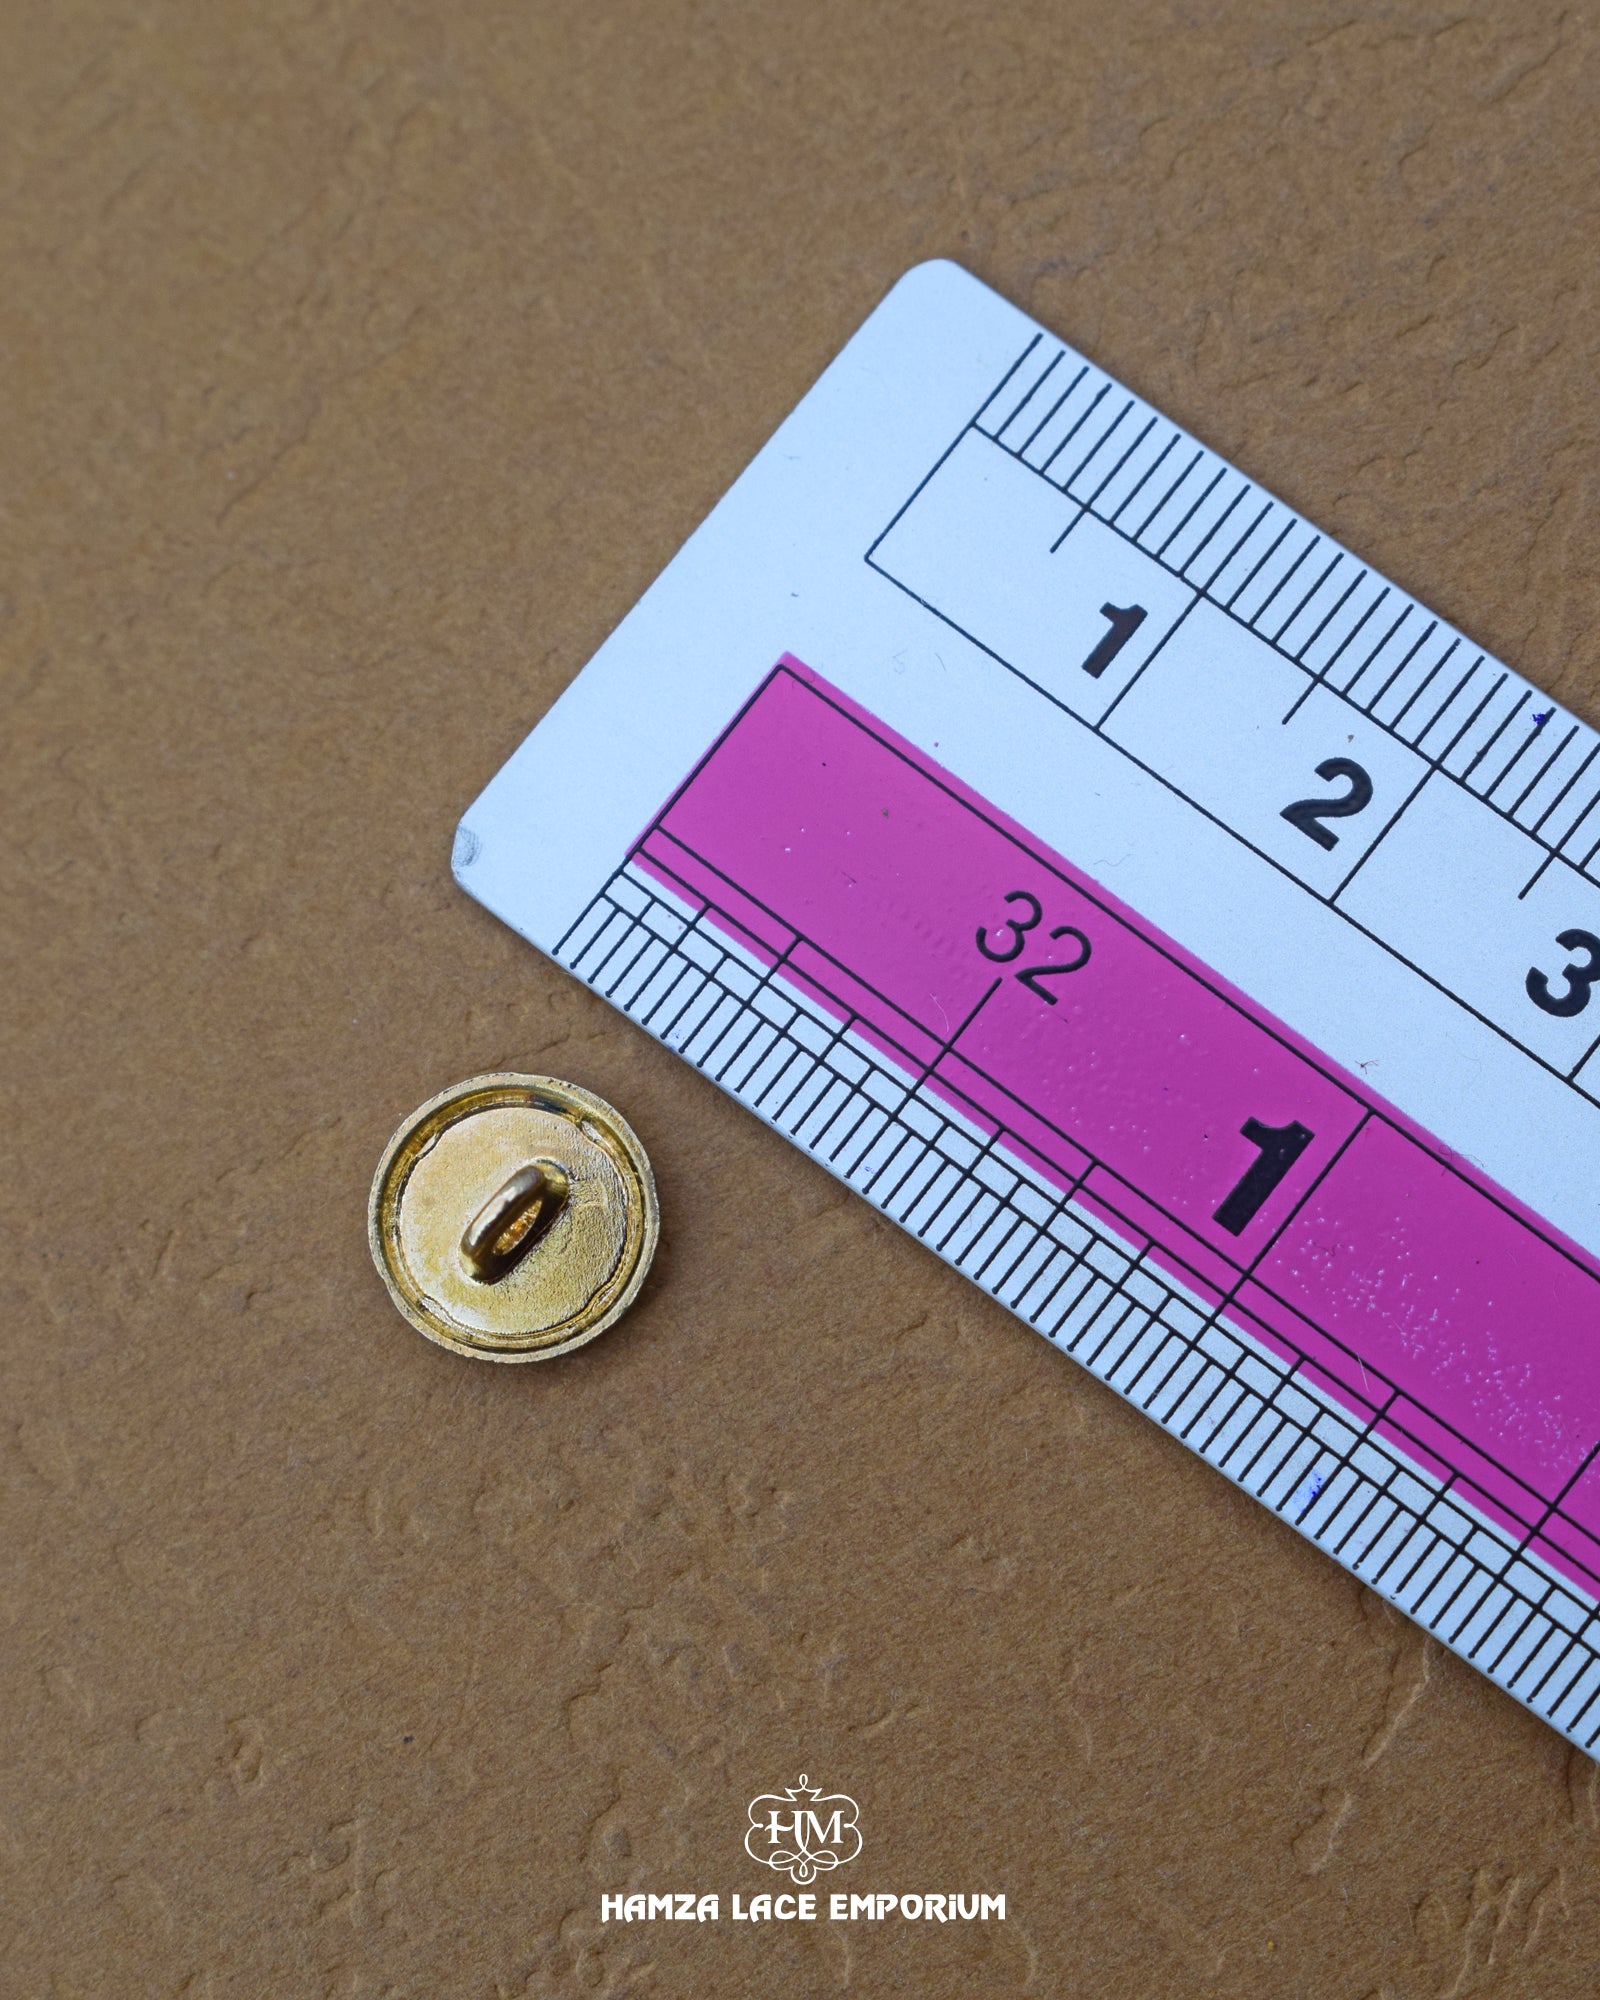 The dimensions of the 'Double Shade Button MB374' are determined using a ruler.